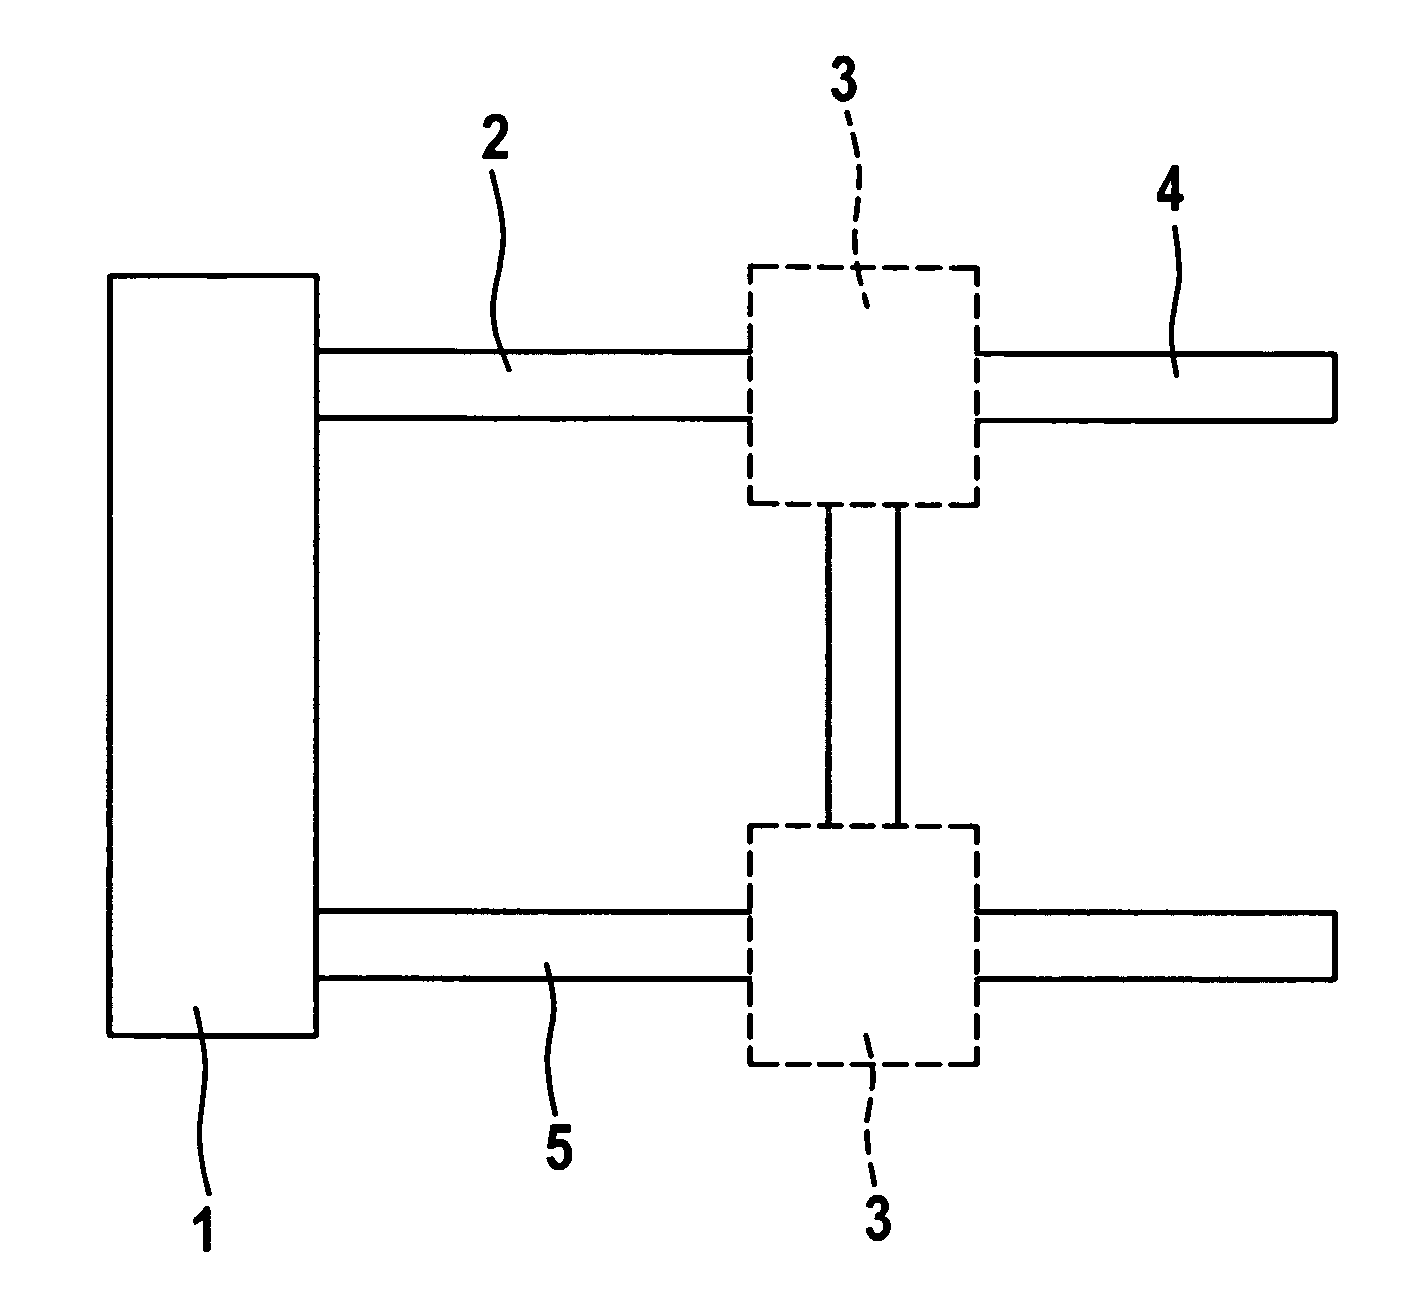 Method for determining the exhaust gas temperature of an internal combustion engine